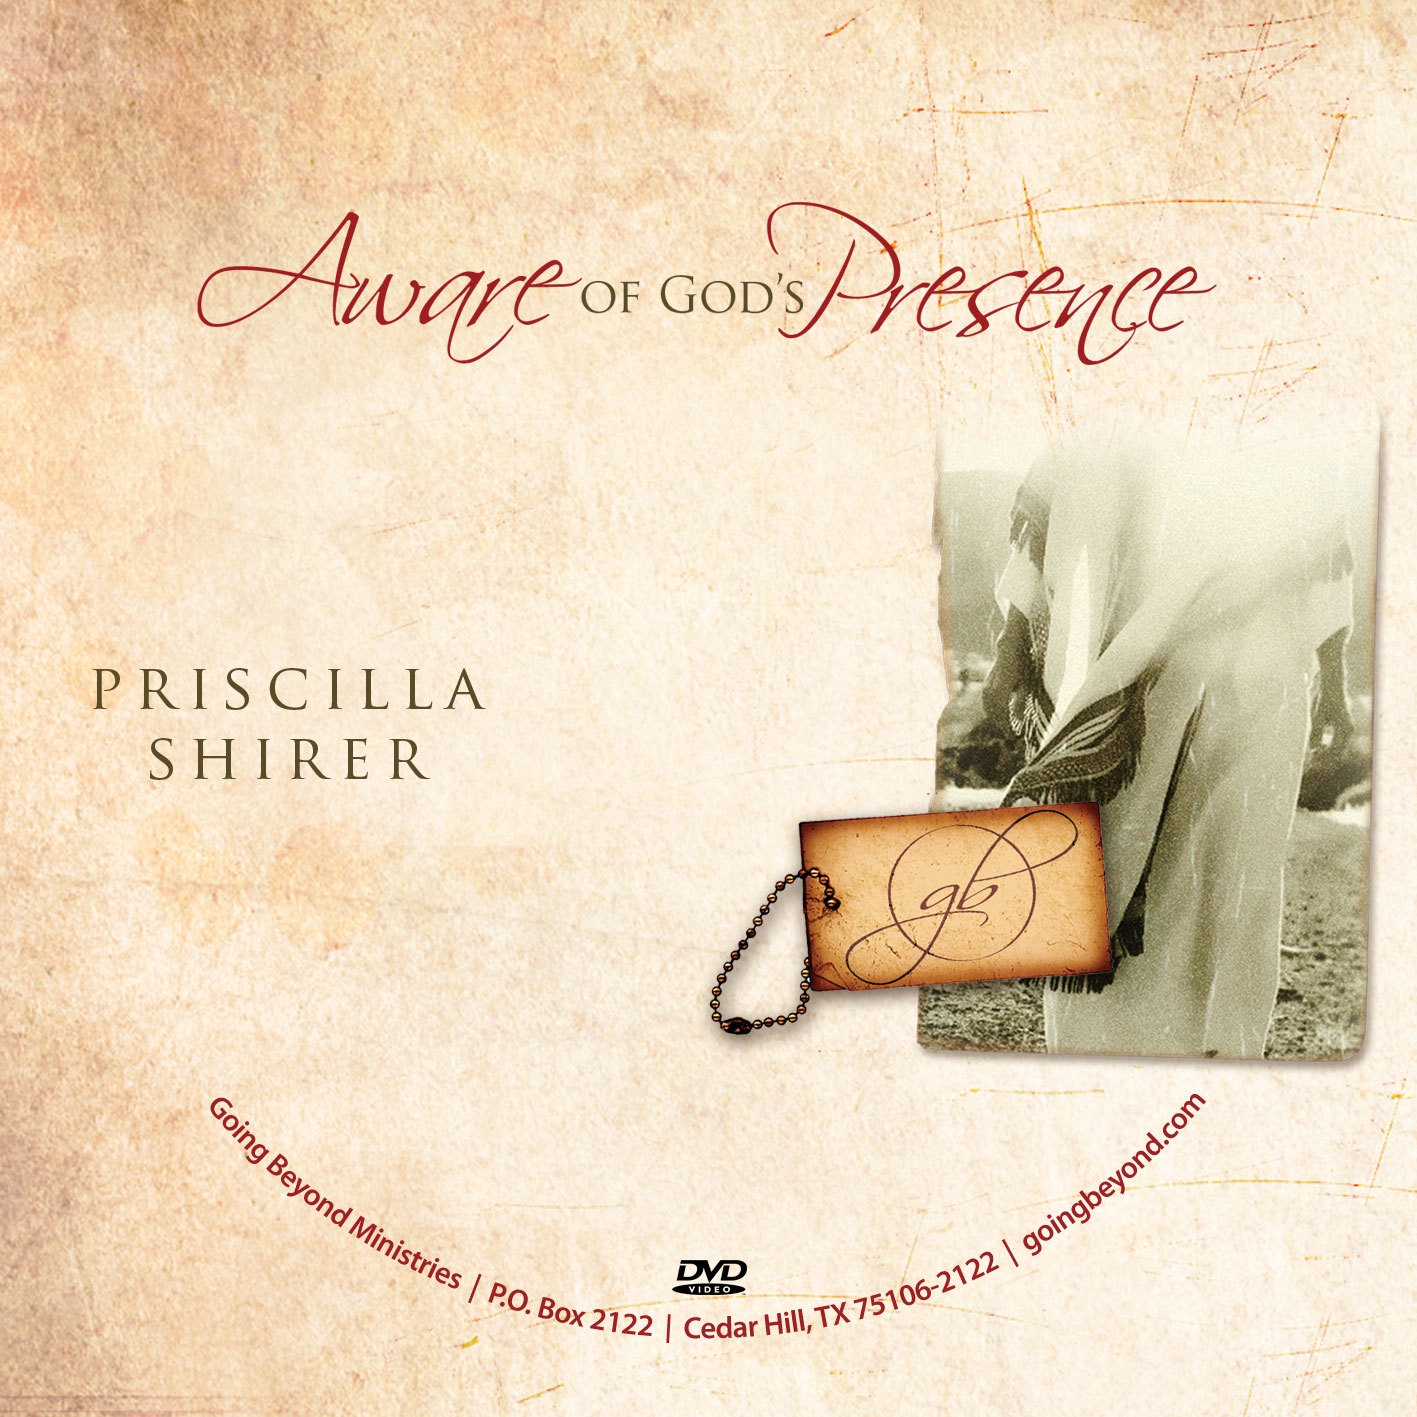 "Aware of God's Presence" with Priscilla Shirer